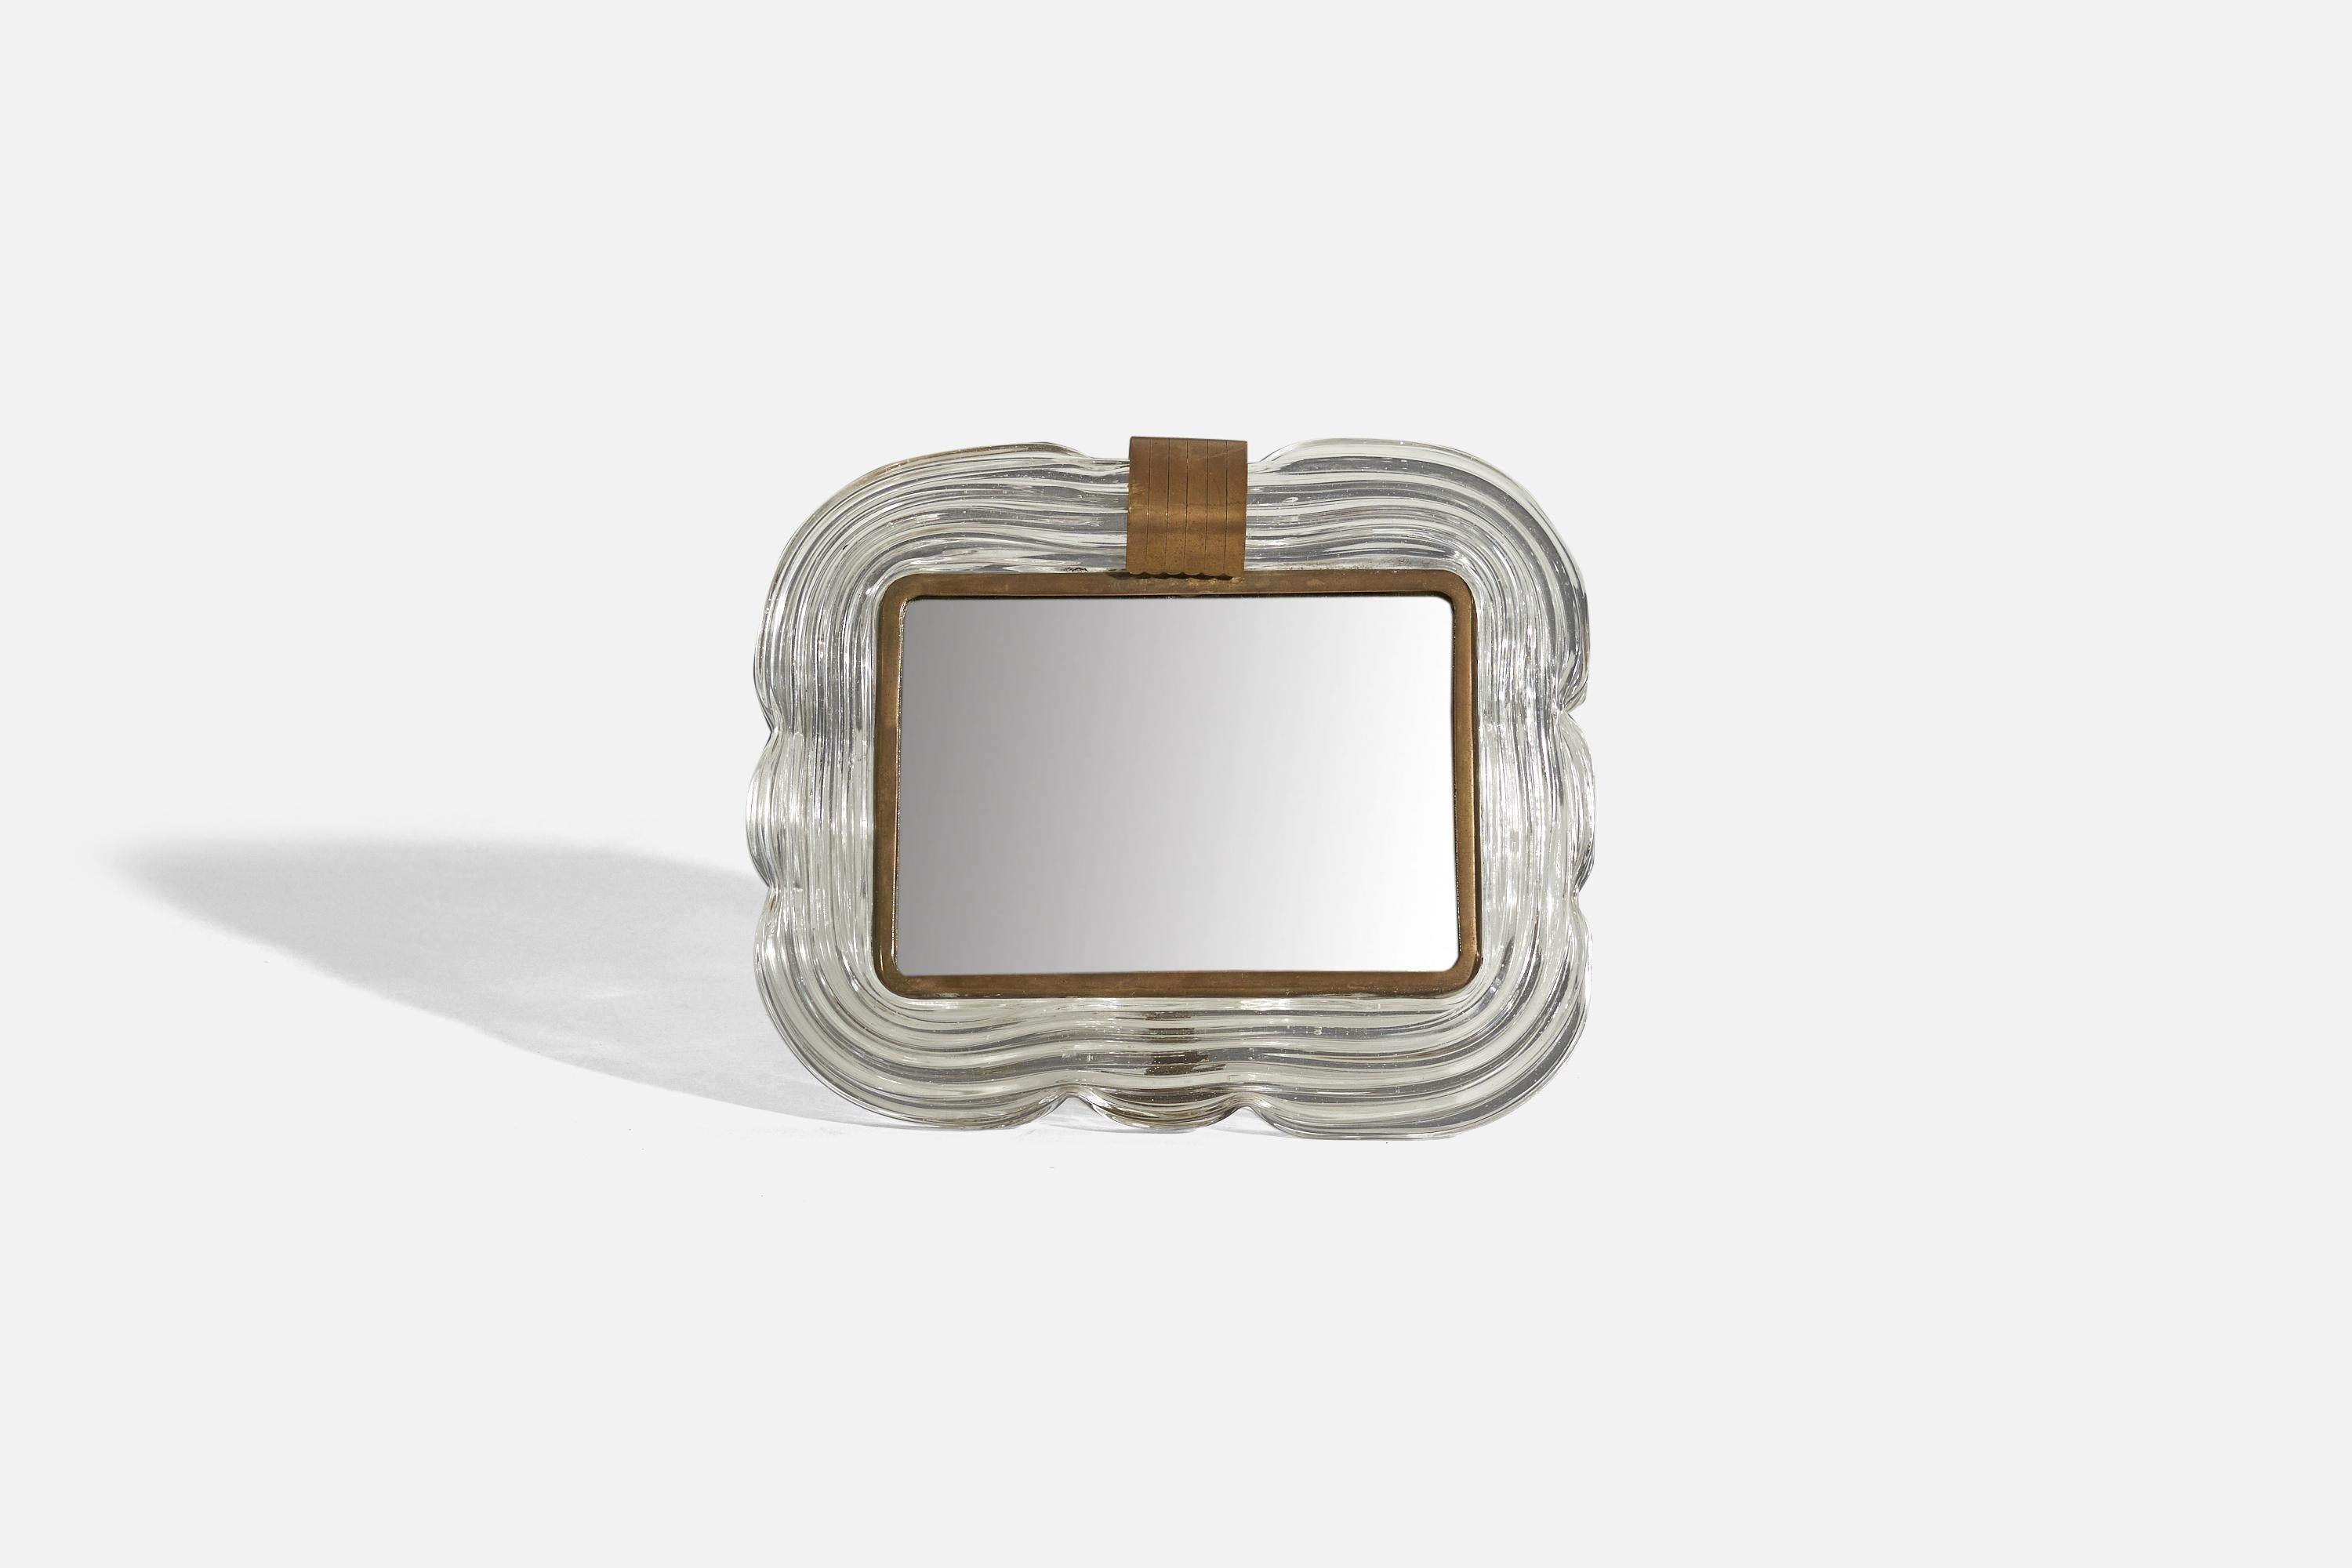 A brass and glass table mirror, designed and produced in Italy, 1940s.